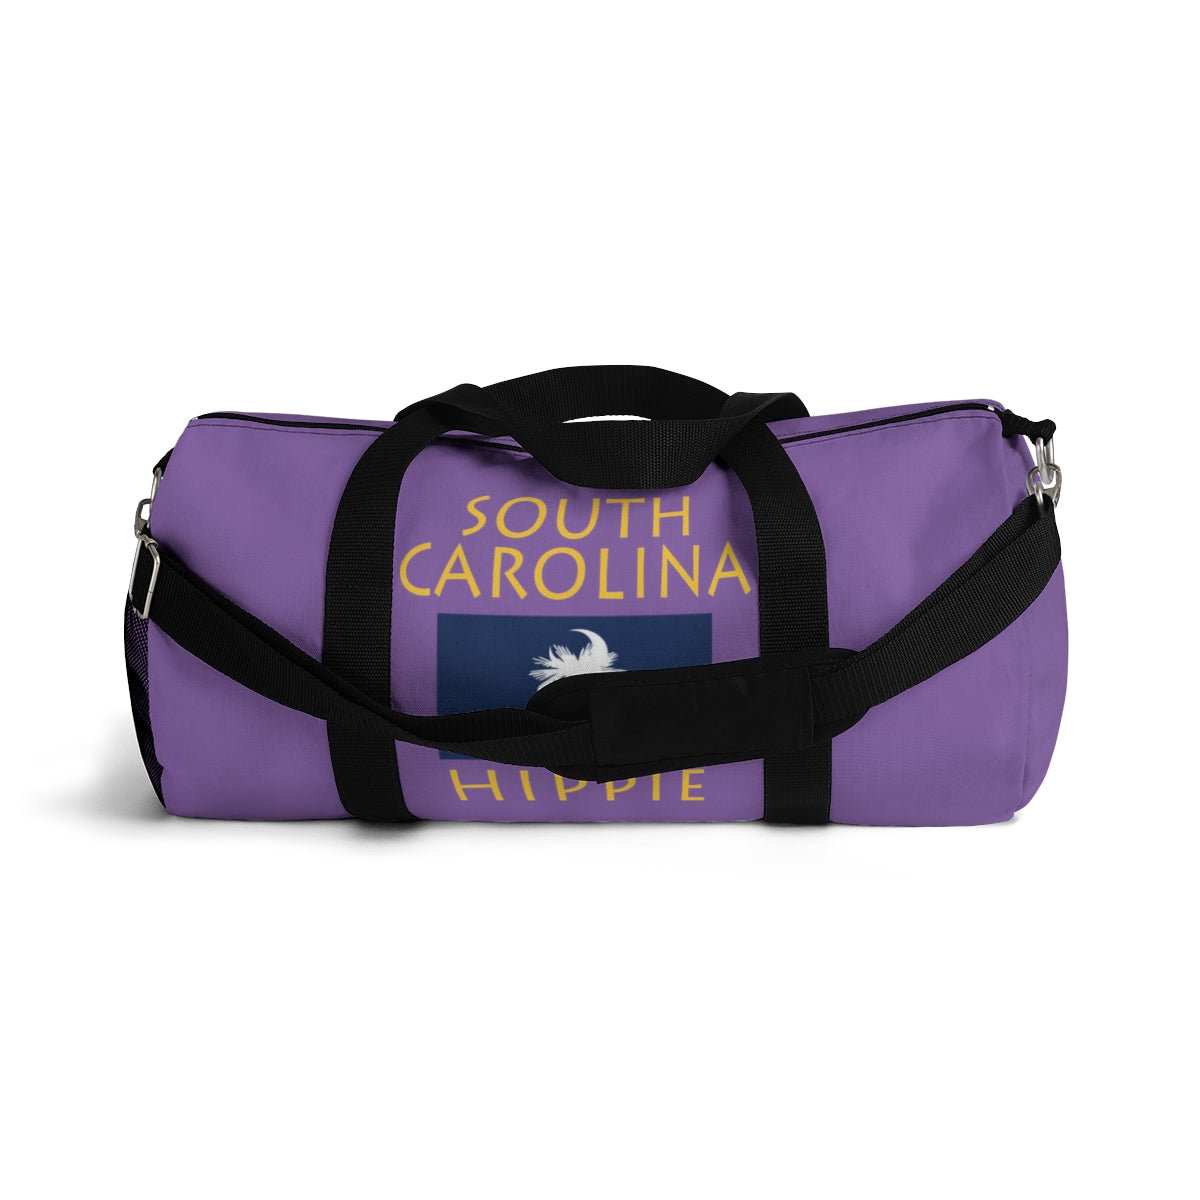   Stately Wear's South Carolina Flag Hippie duffel bag is colorful, iconic and stylish. We are a Katie Couric Shop partner. This duffel bag is the perfect accessory as a beach bag, ski bag, travel bag, shopping bag & gym bag, Pilates bag or yoga bag. Custom made one-at-a-time with environmentally friendly biodegradable inks & dyes. 2 sizes to choose. Stately Wear's bags are very durable, soft and colorful duffels with durable straps.